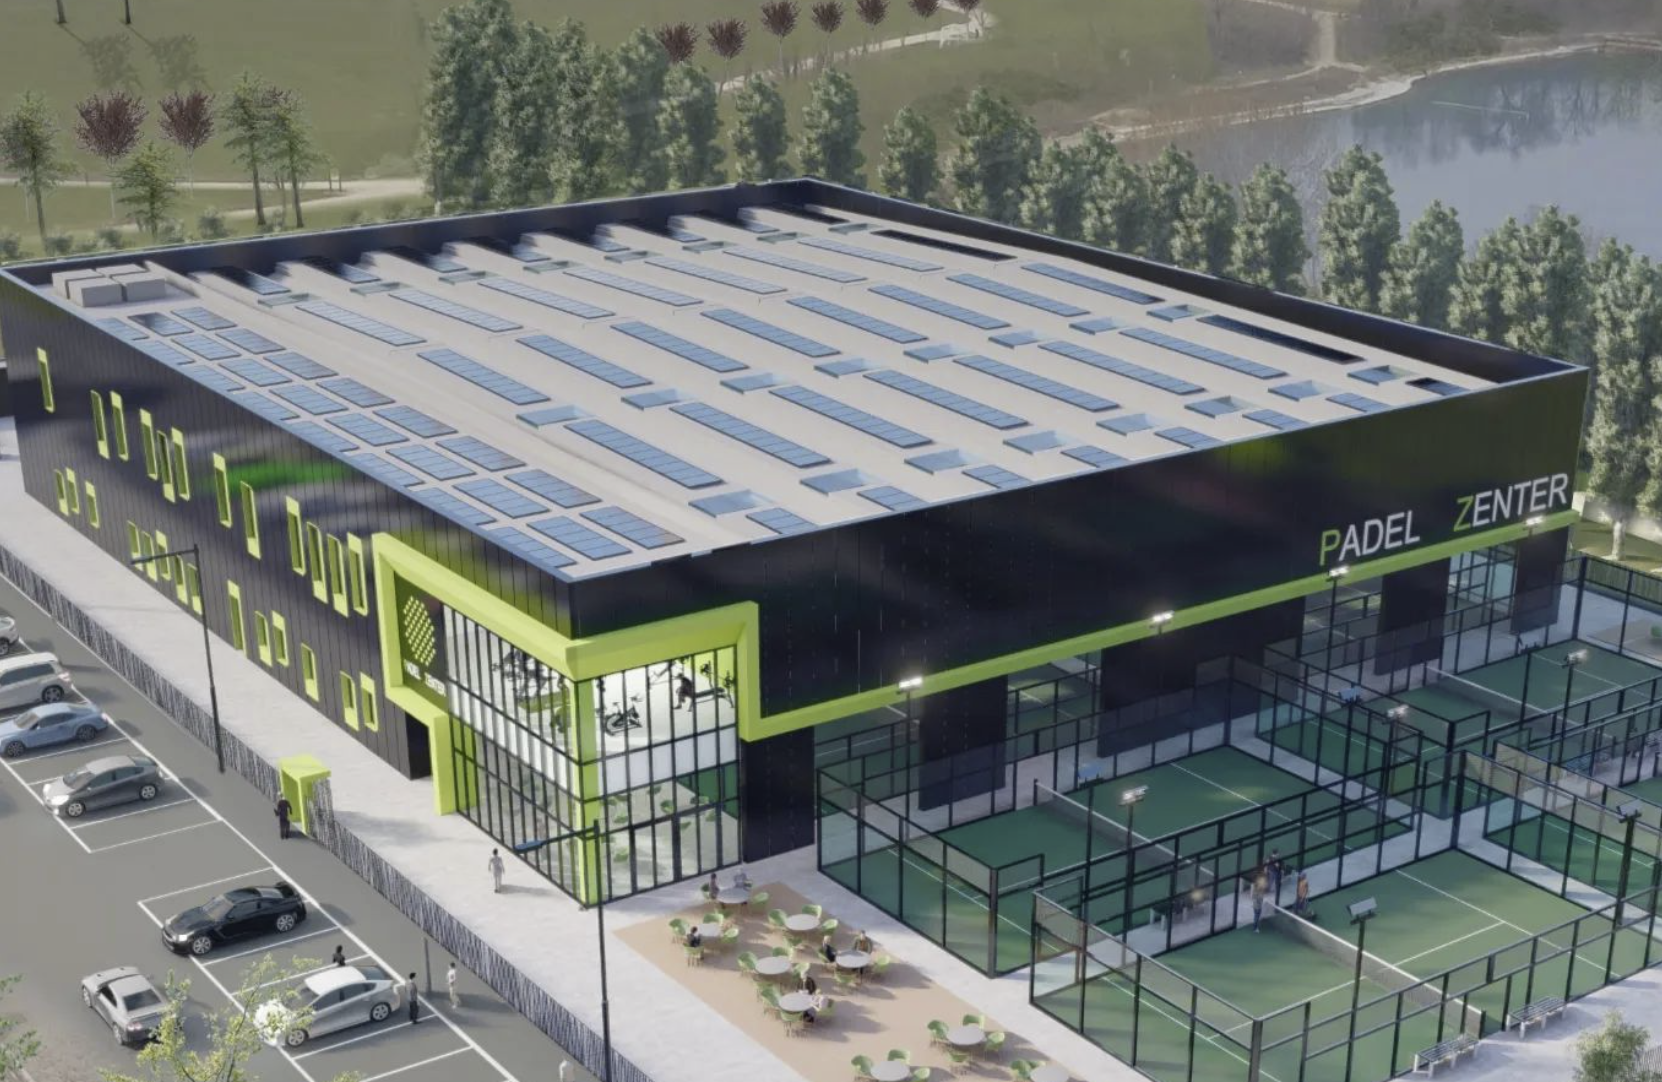 Padel Zenter Milano arrives with 11 pitches